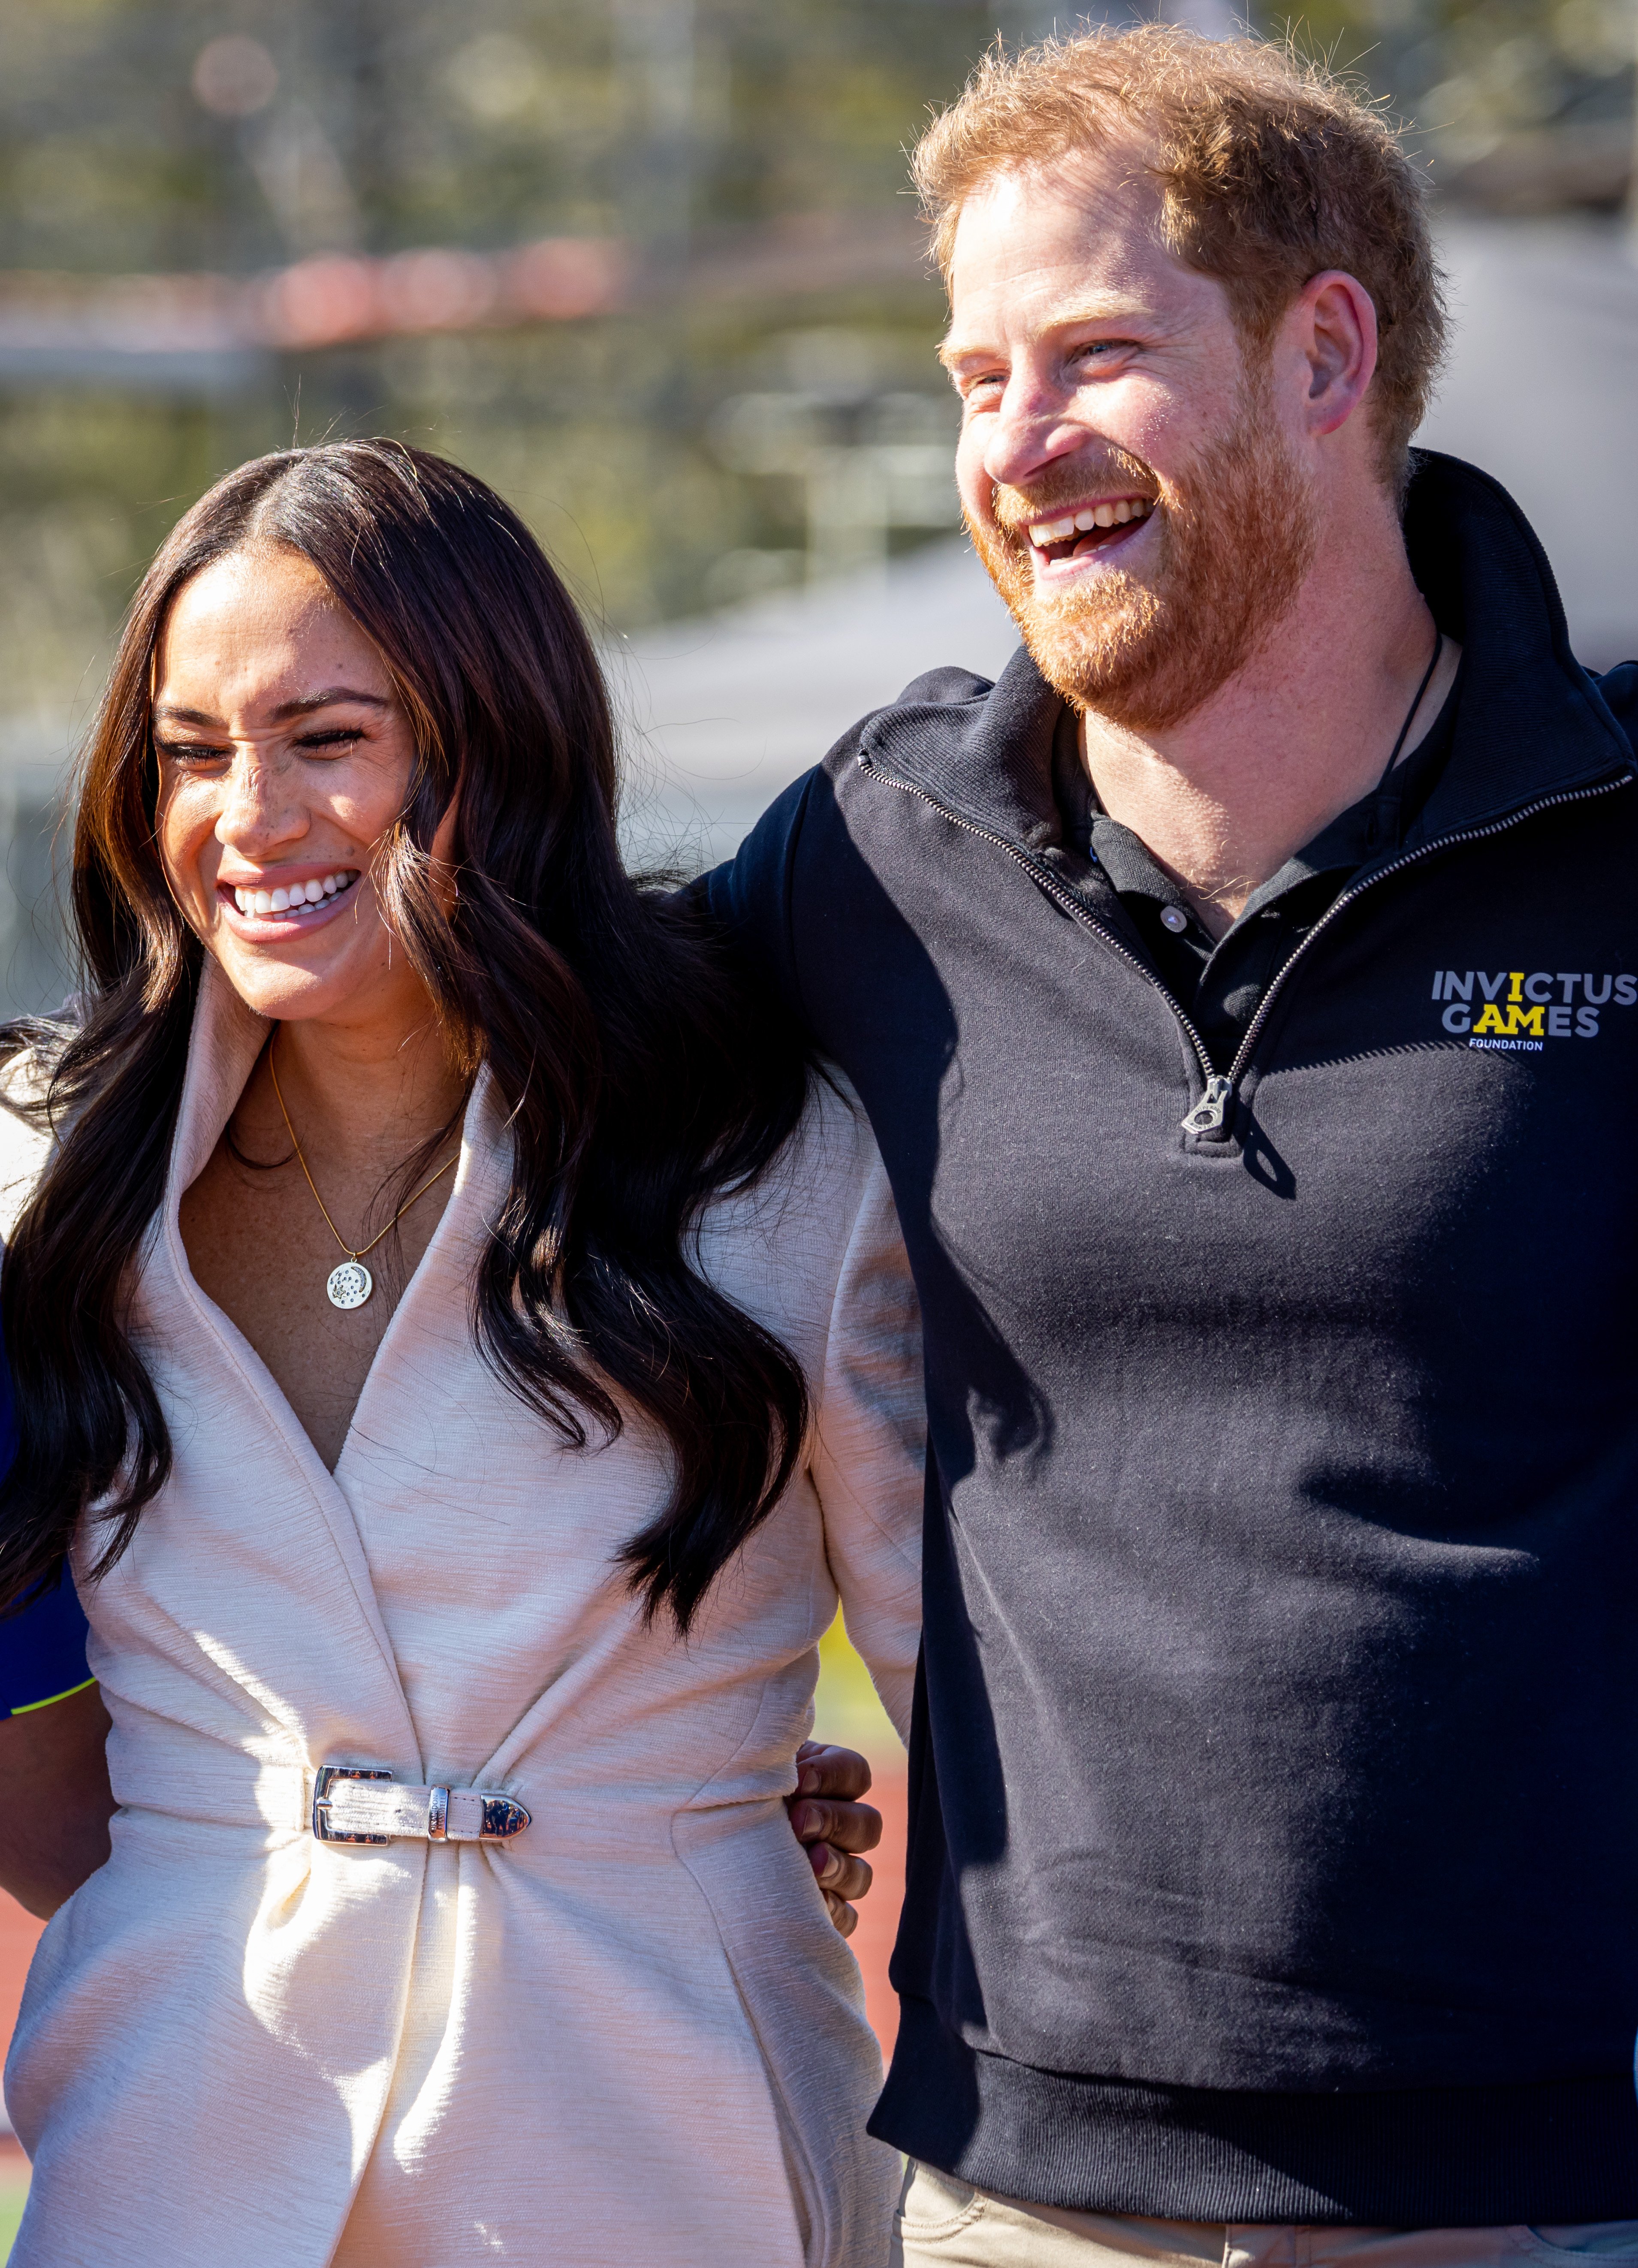 Meghan Markle and Prince Harry at the Invictus Games on April 17, 2022 in The Hague, Netherlands. | Source: Getty Images 